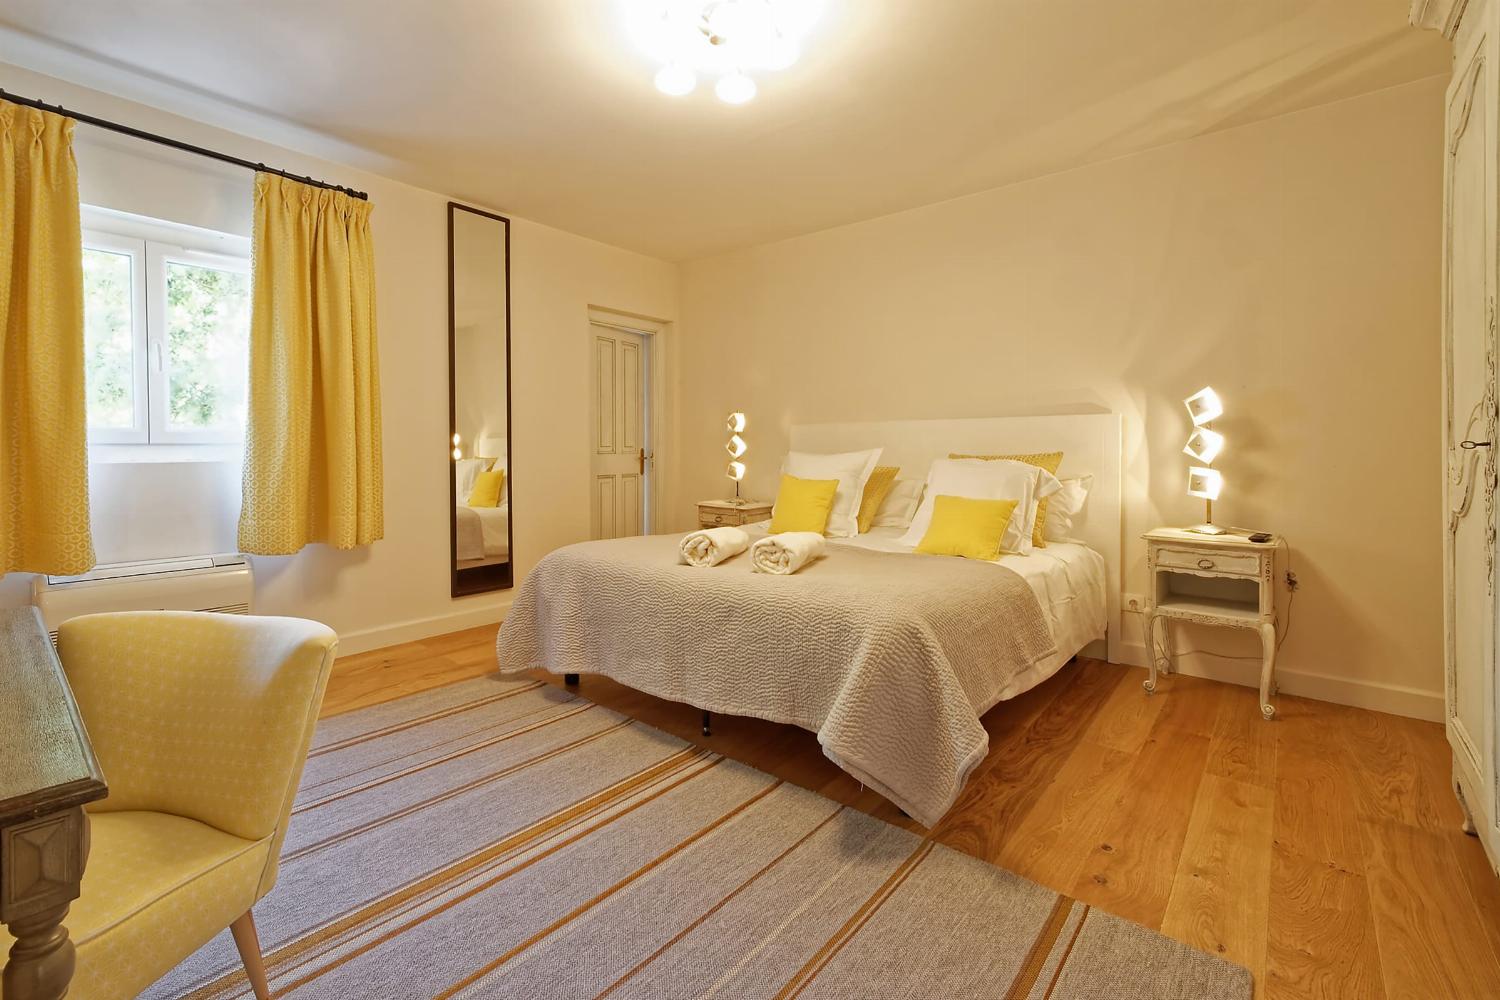 Bedroom | Vacation accommodation in Provence